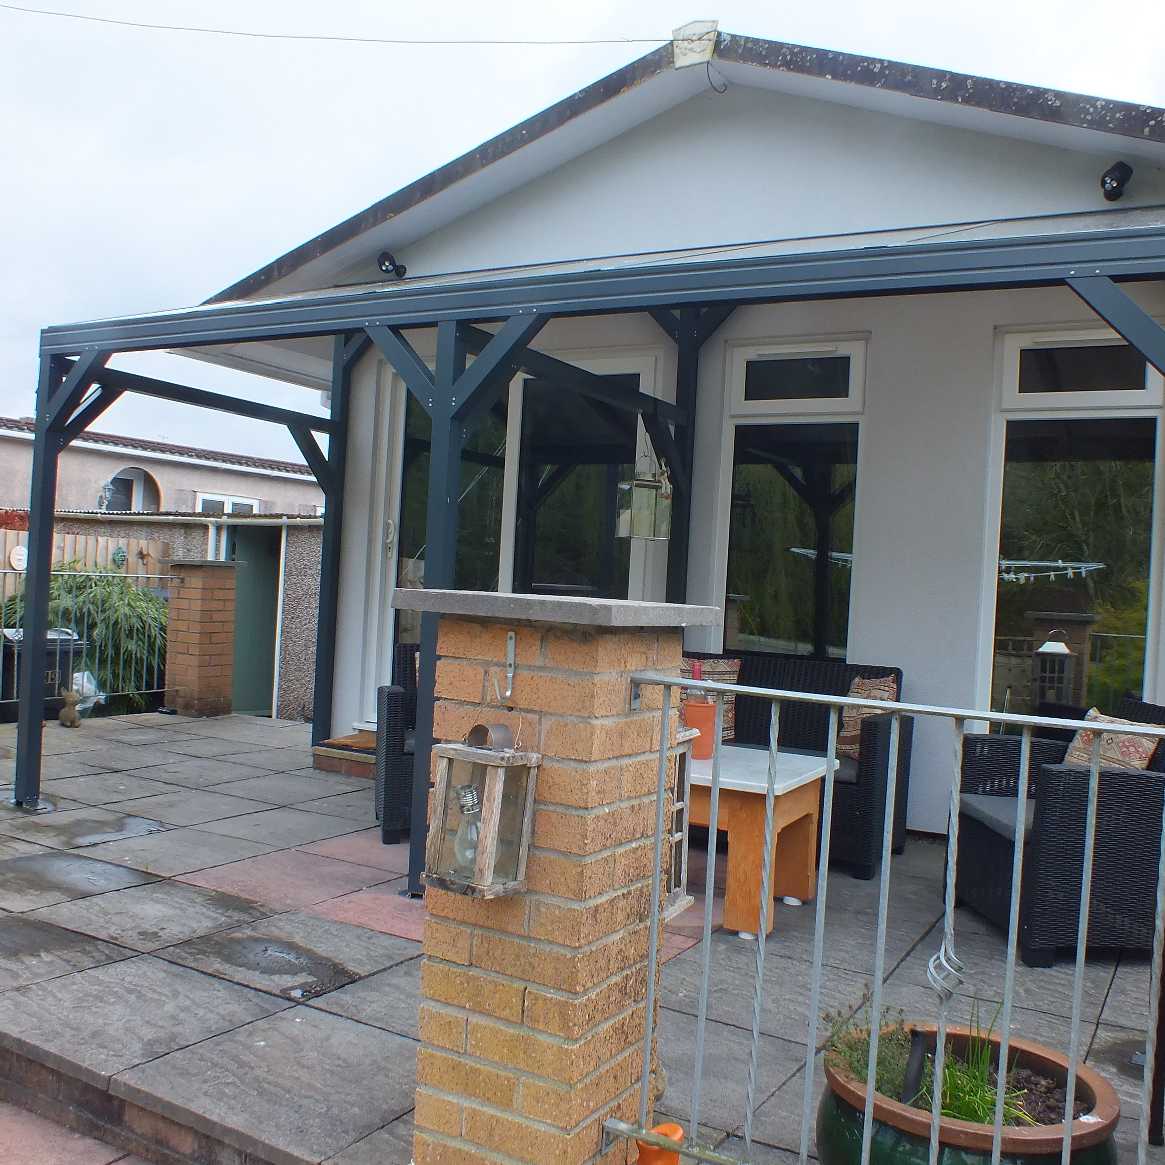 Buy Omega Smart Free-Standing, Anthracite Grey MonoPitch Roof Canopy with 16mm Polycarbonate Glazing - 5.2m (W) x 2.5m (P), (6) Supporting Posts online today